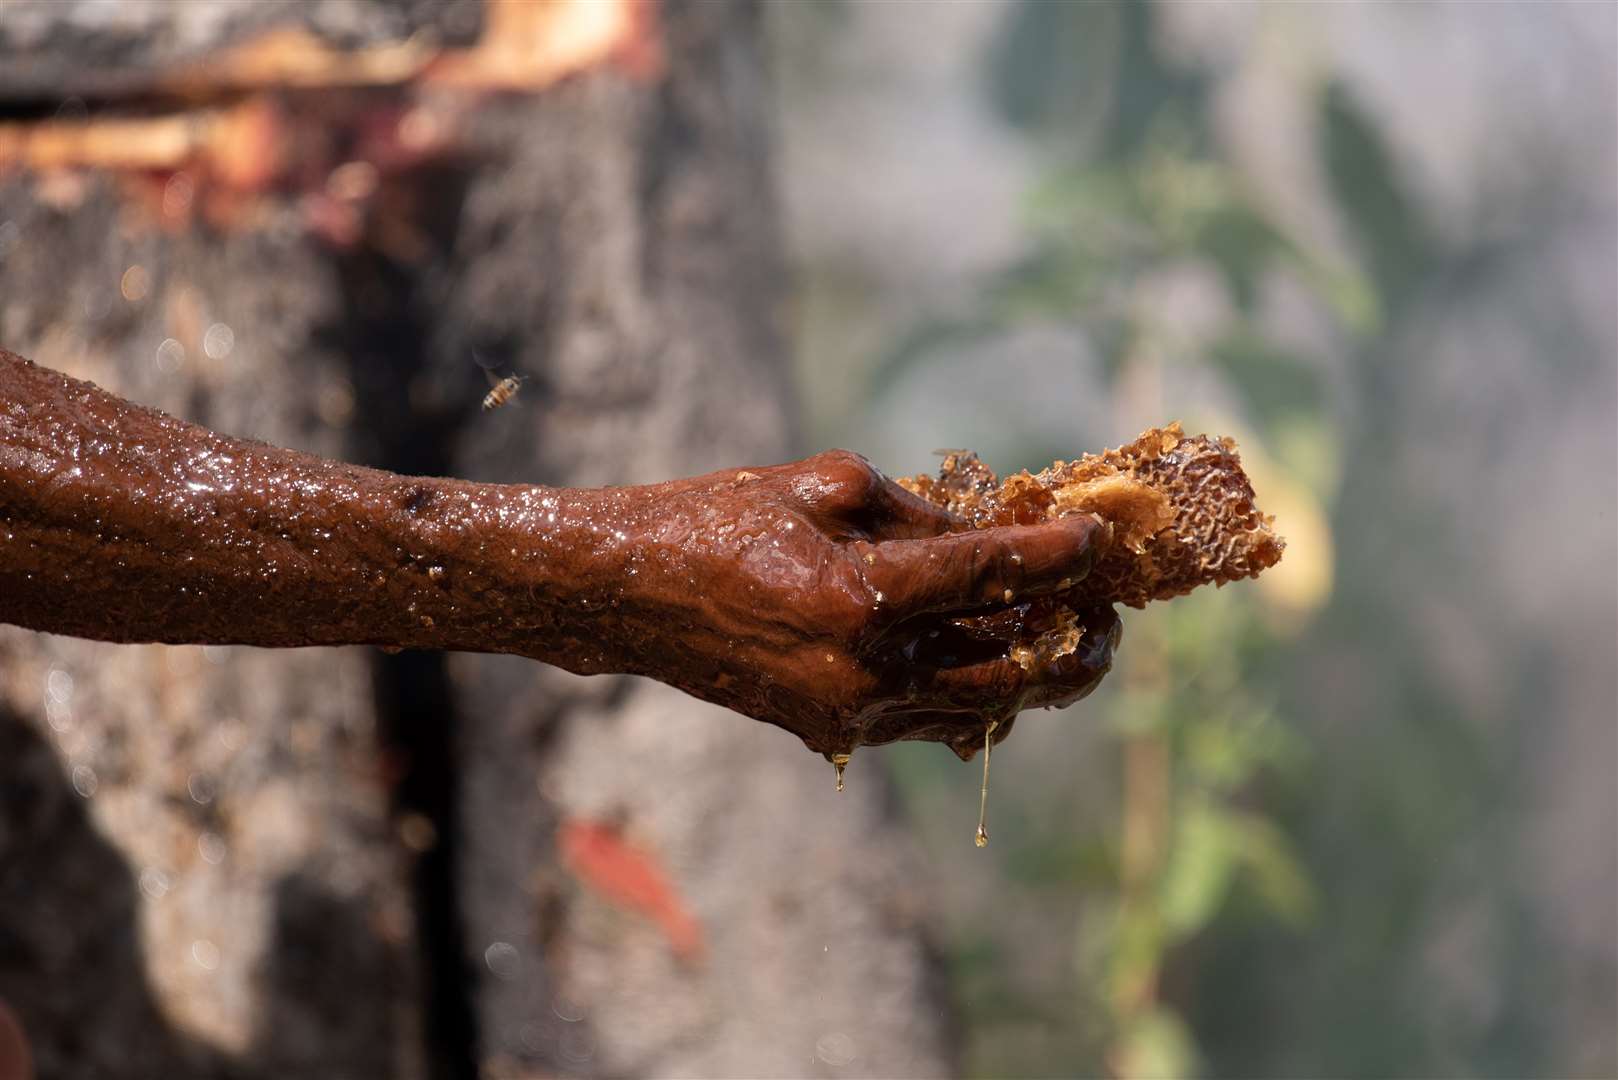 Honey harvest in the Niassa Special Reserve in Mozambique (Claire Spottiswoode/University of Cambridge)